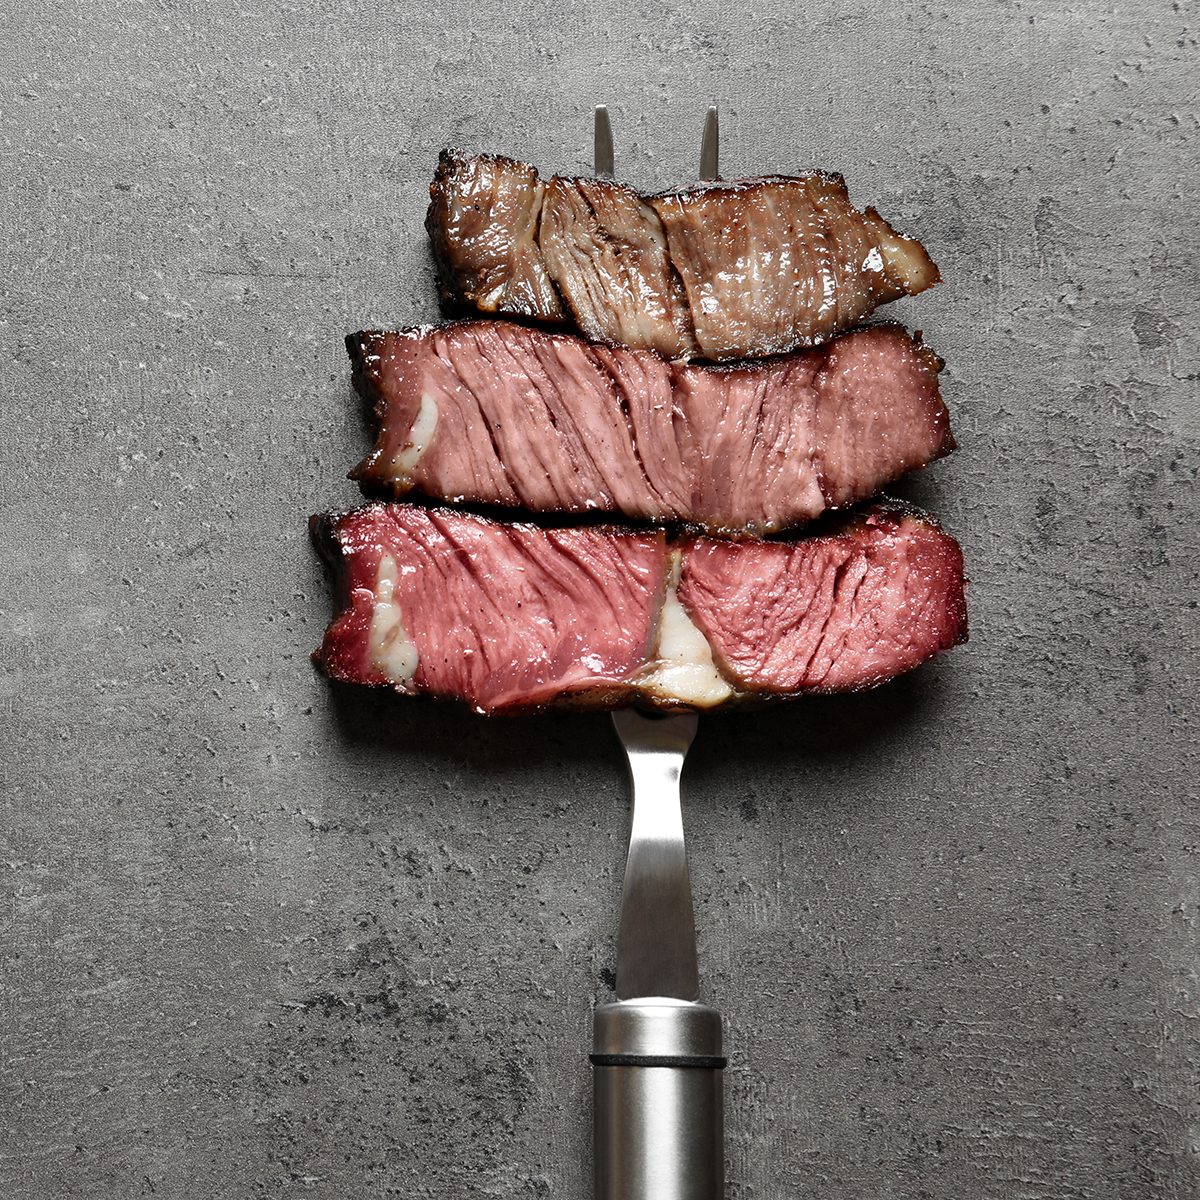 10 Secrets a Steakhouse Chef Will Never Tell You | Taste of Home